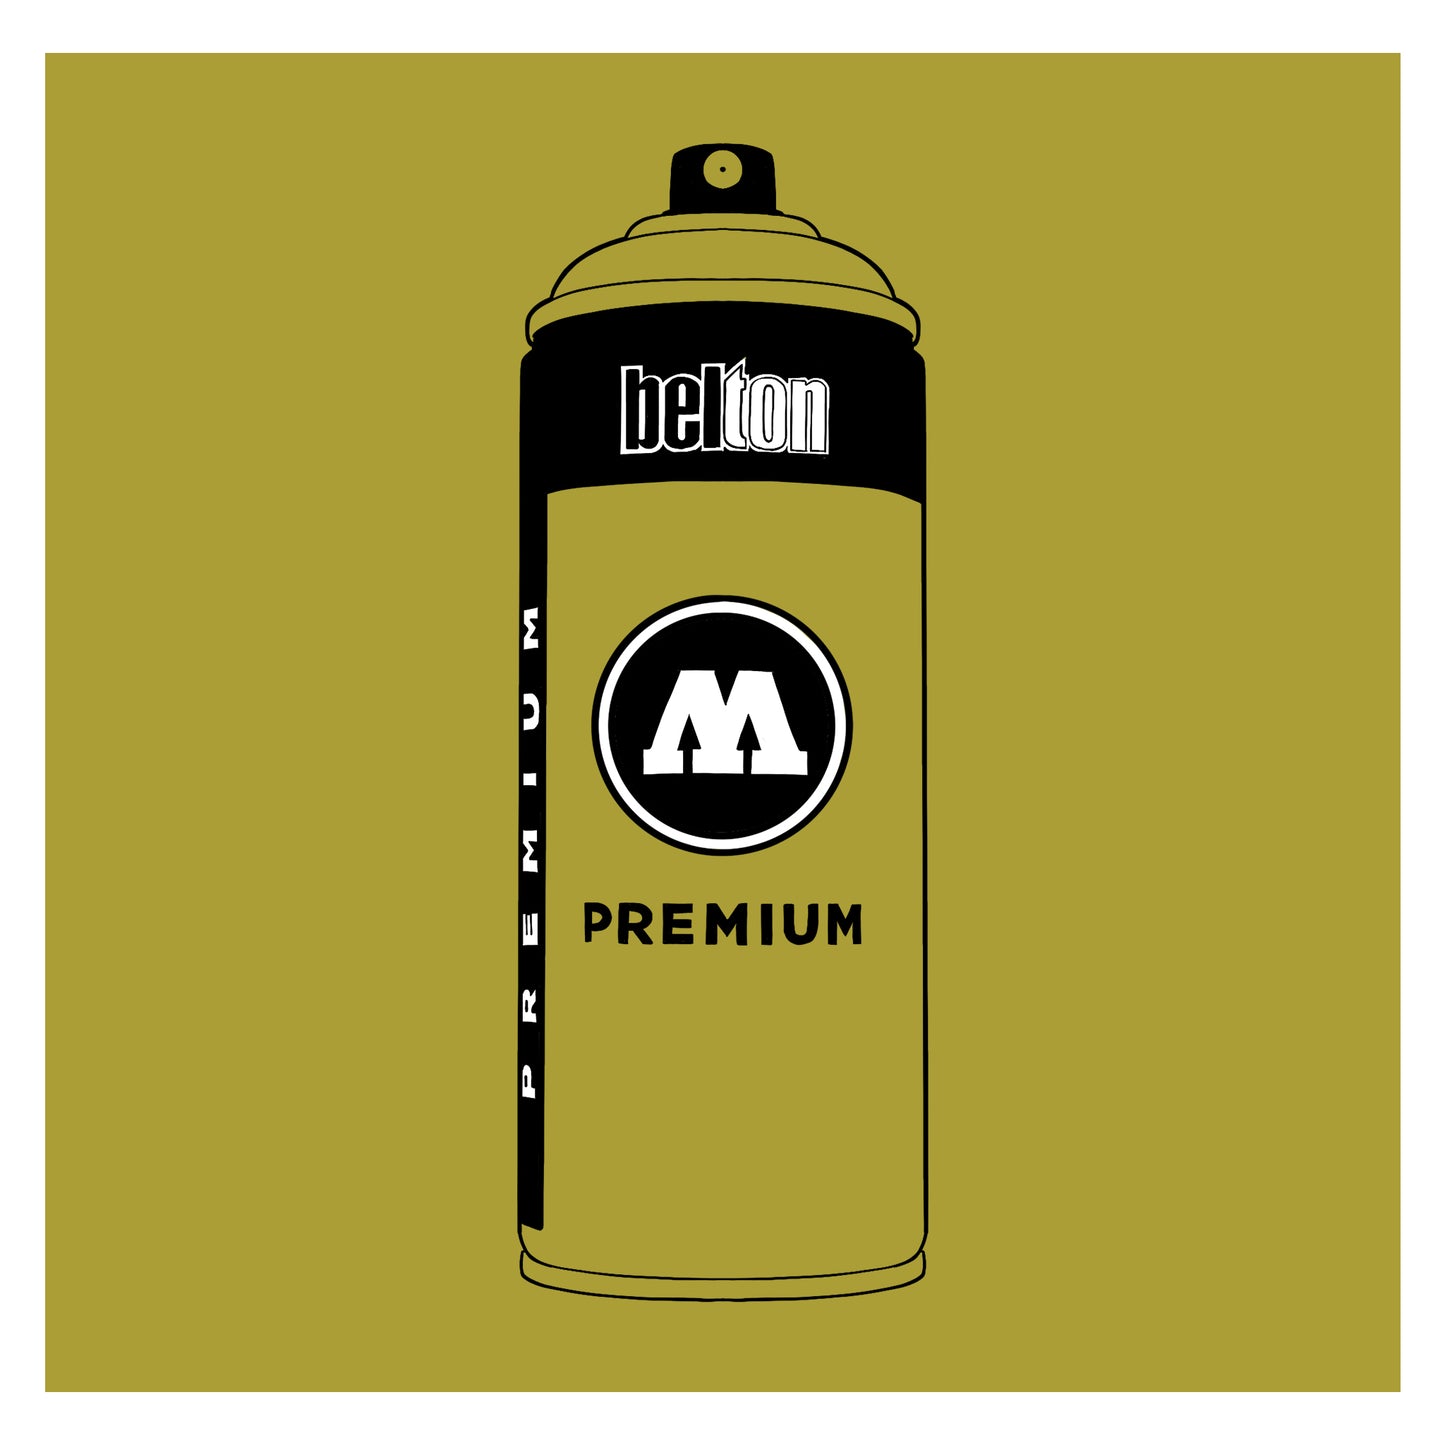 A black outline drawing of a pastel pea green olive spray paint can with the words "belton","premium" and the letter"M" written on the face in black and white font. The background is a color swatch of the same pea green olive with a white border